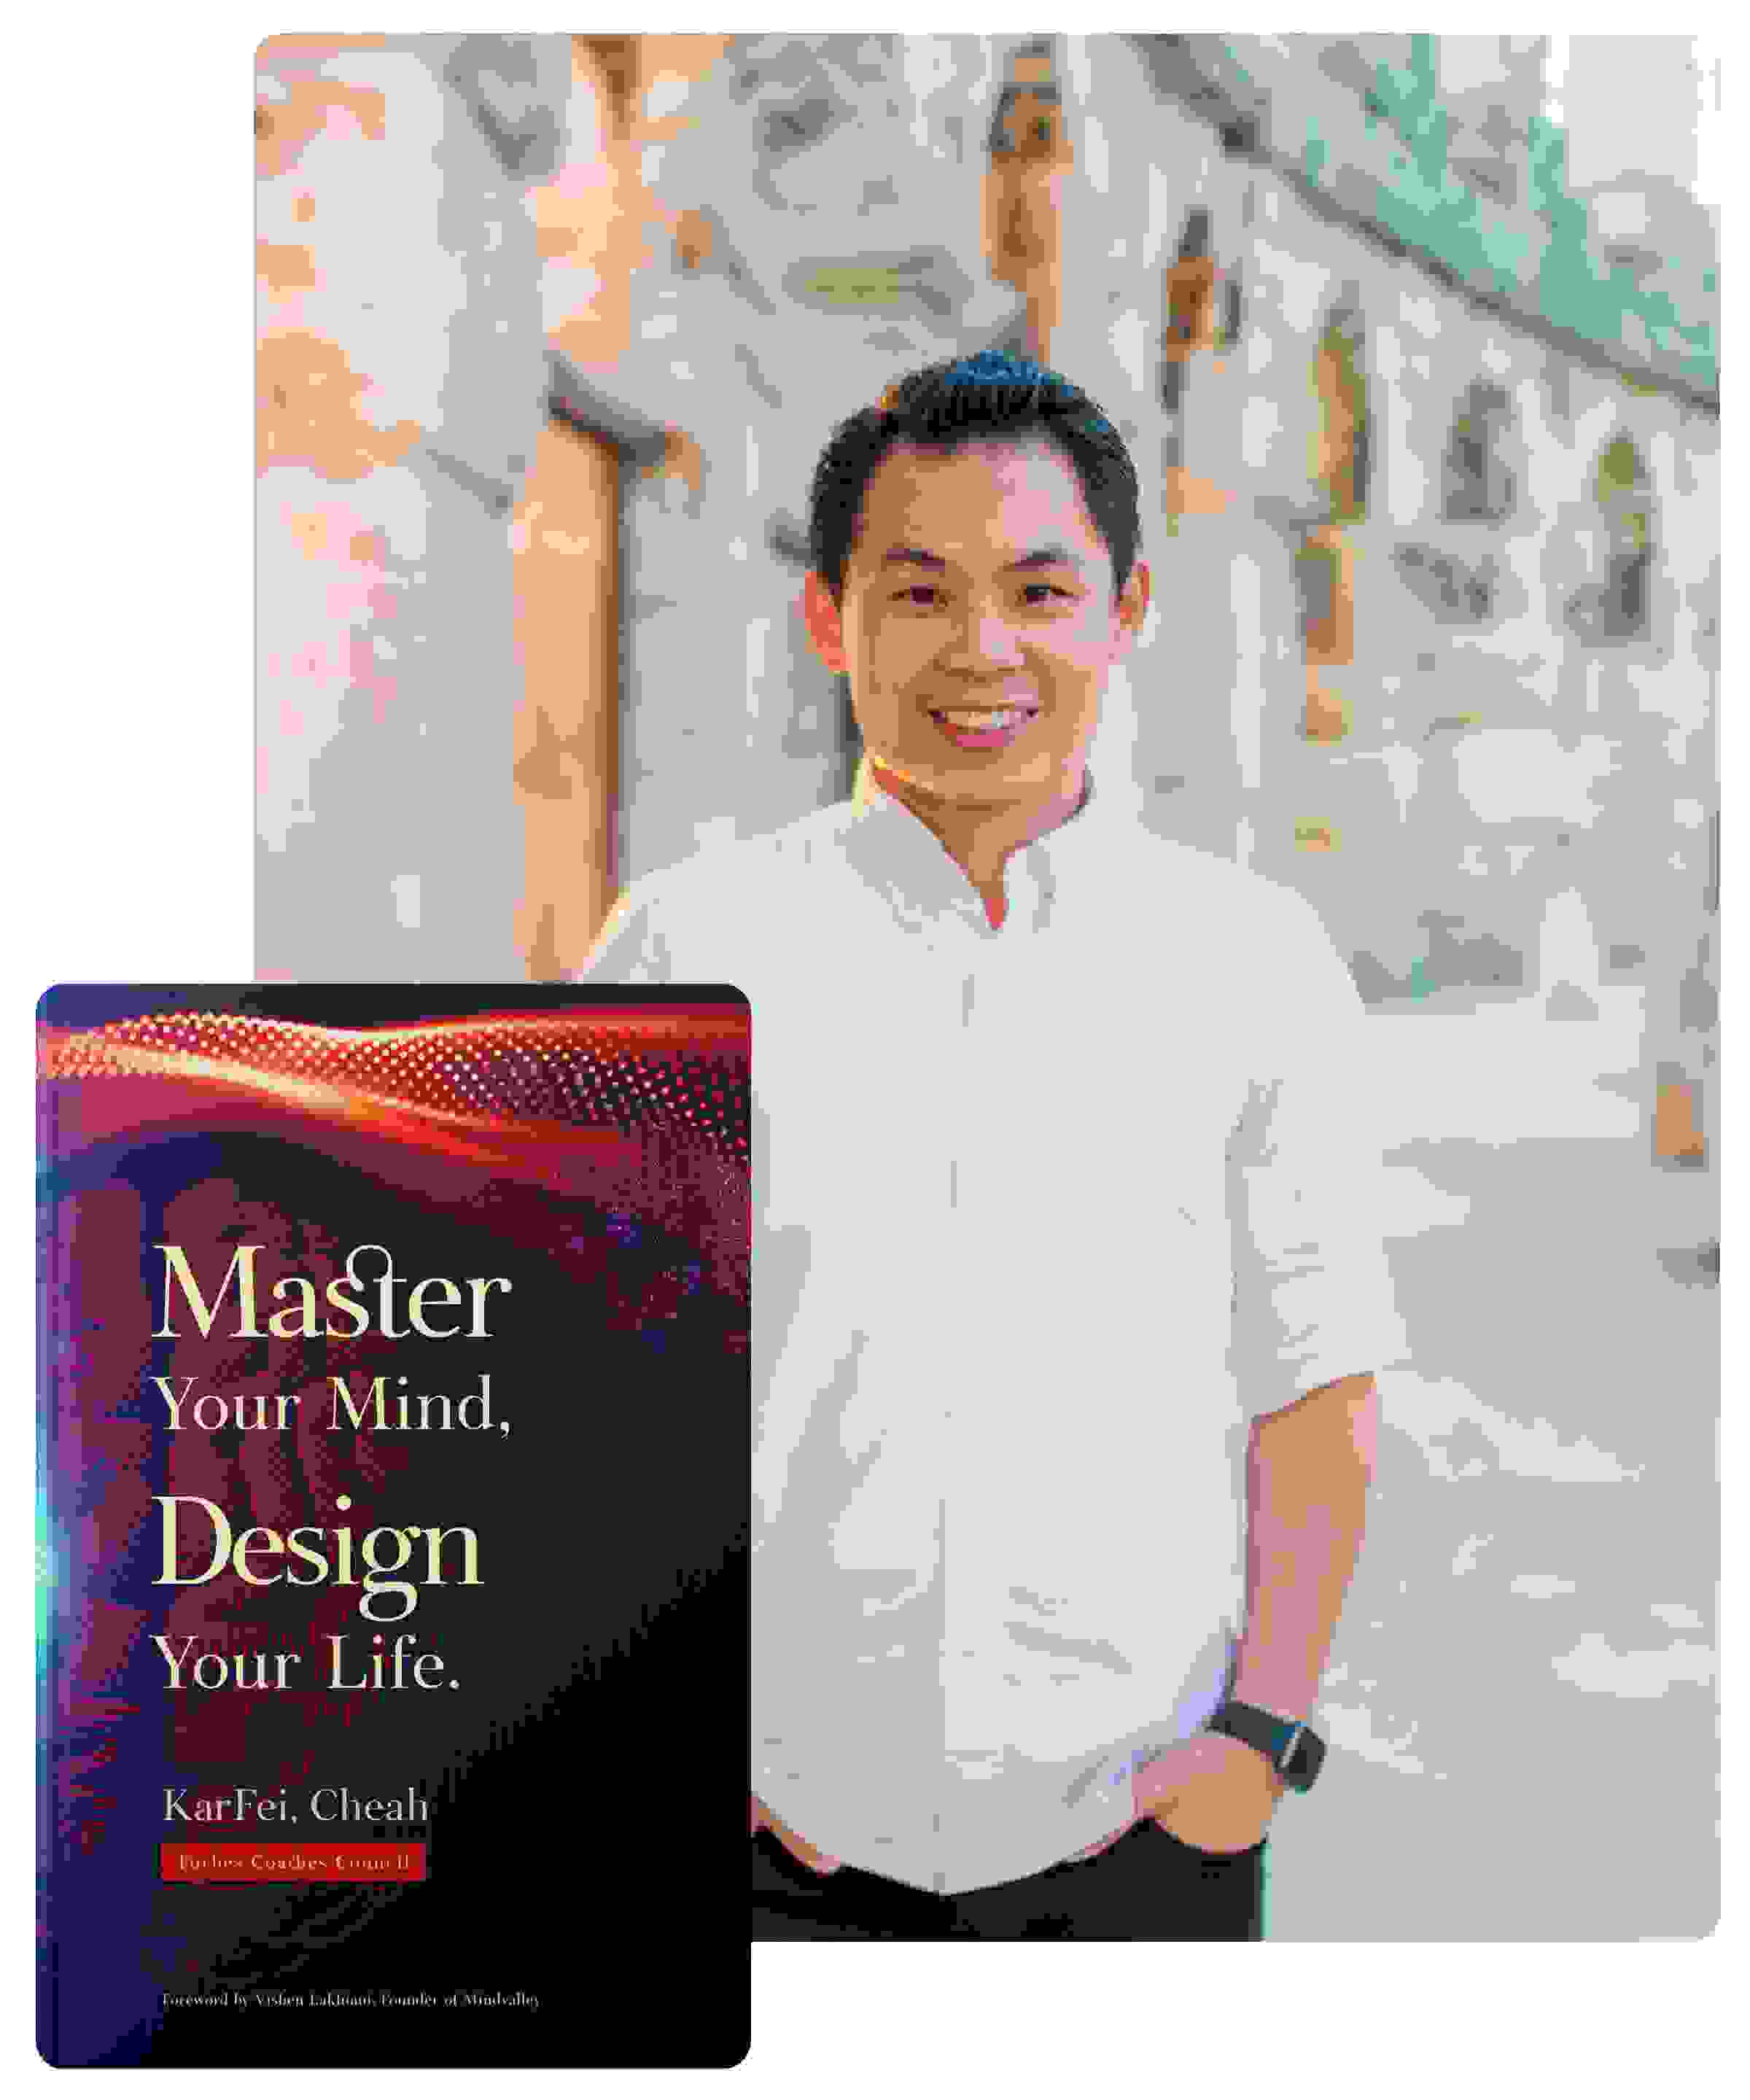 KarFei author of "Master Your Mind. Design Your Life"